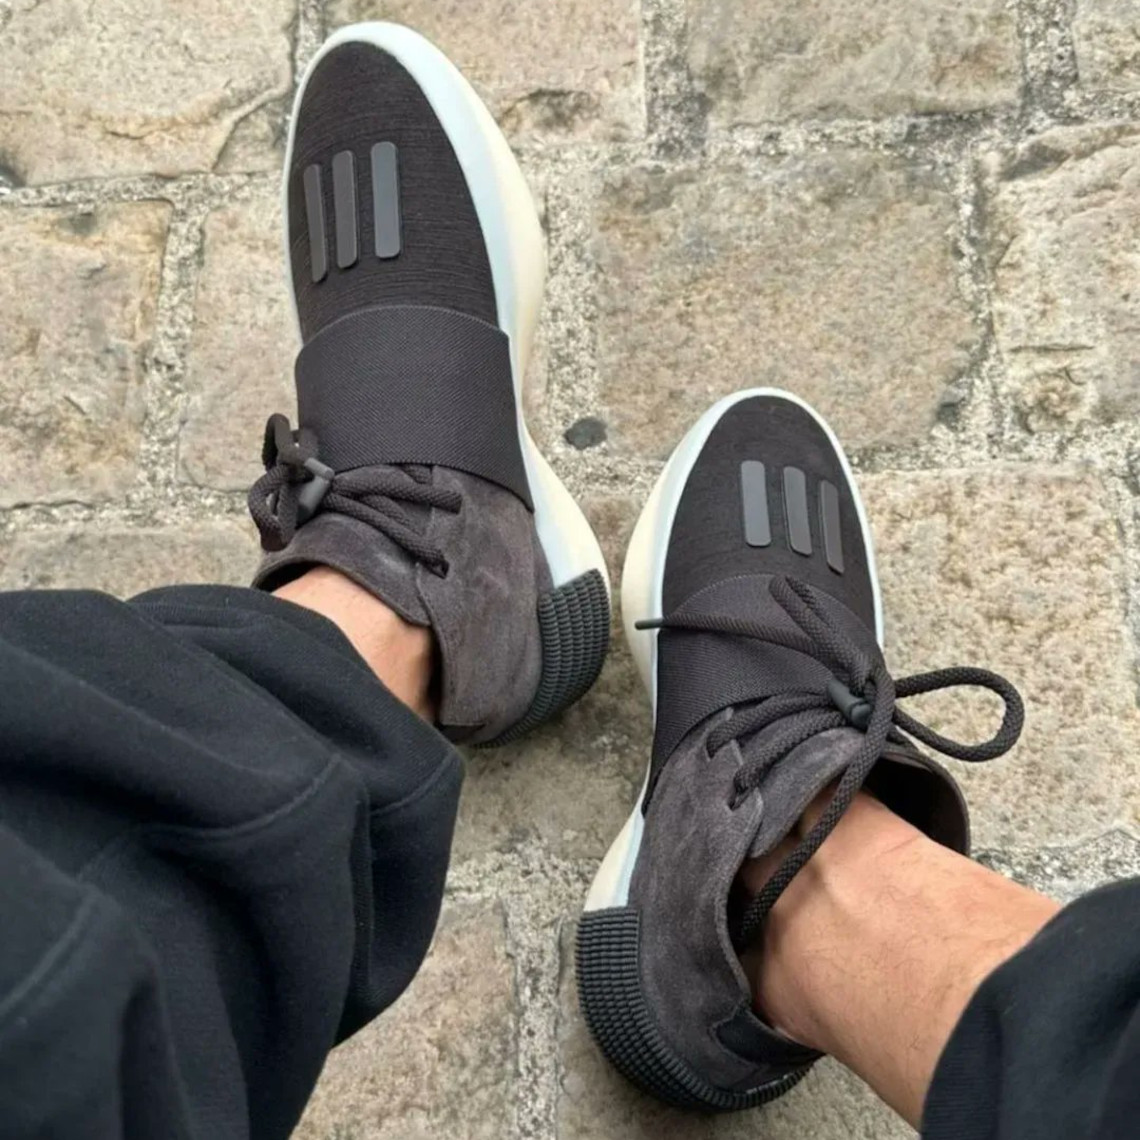 sneakernews.com - Jerry Lorenzo wore his new Fear of God x